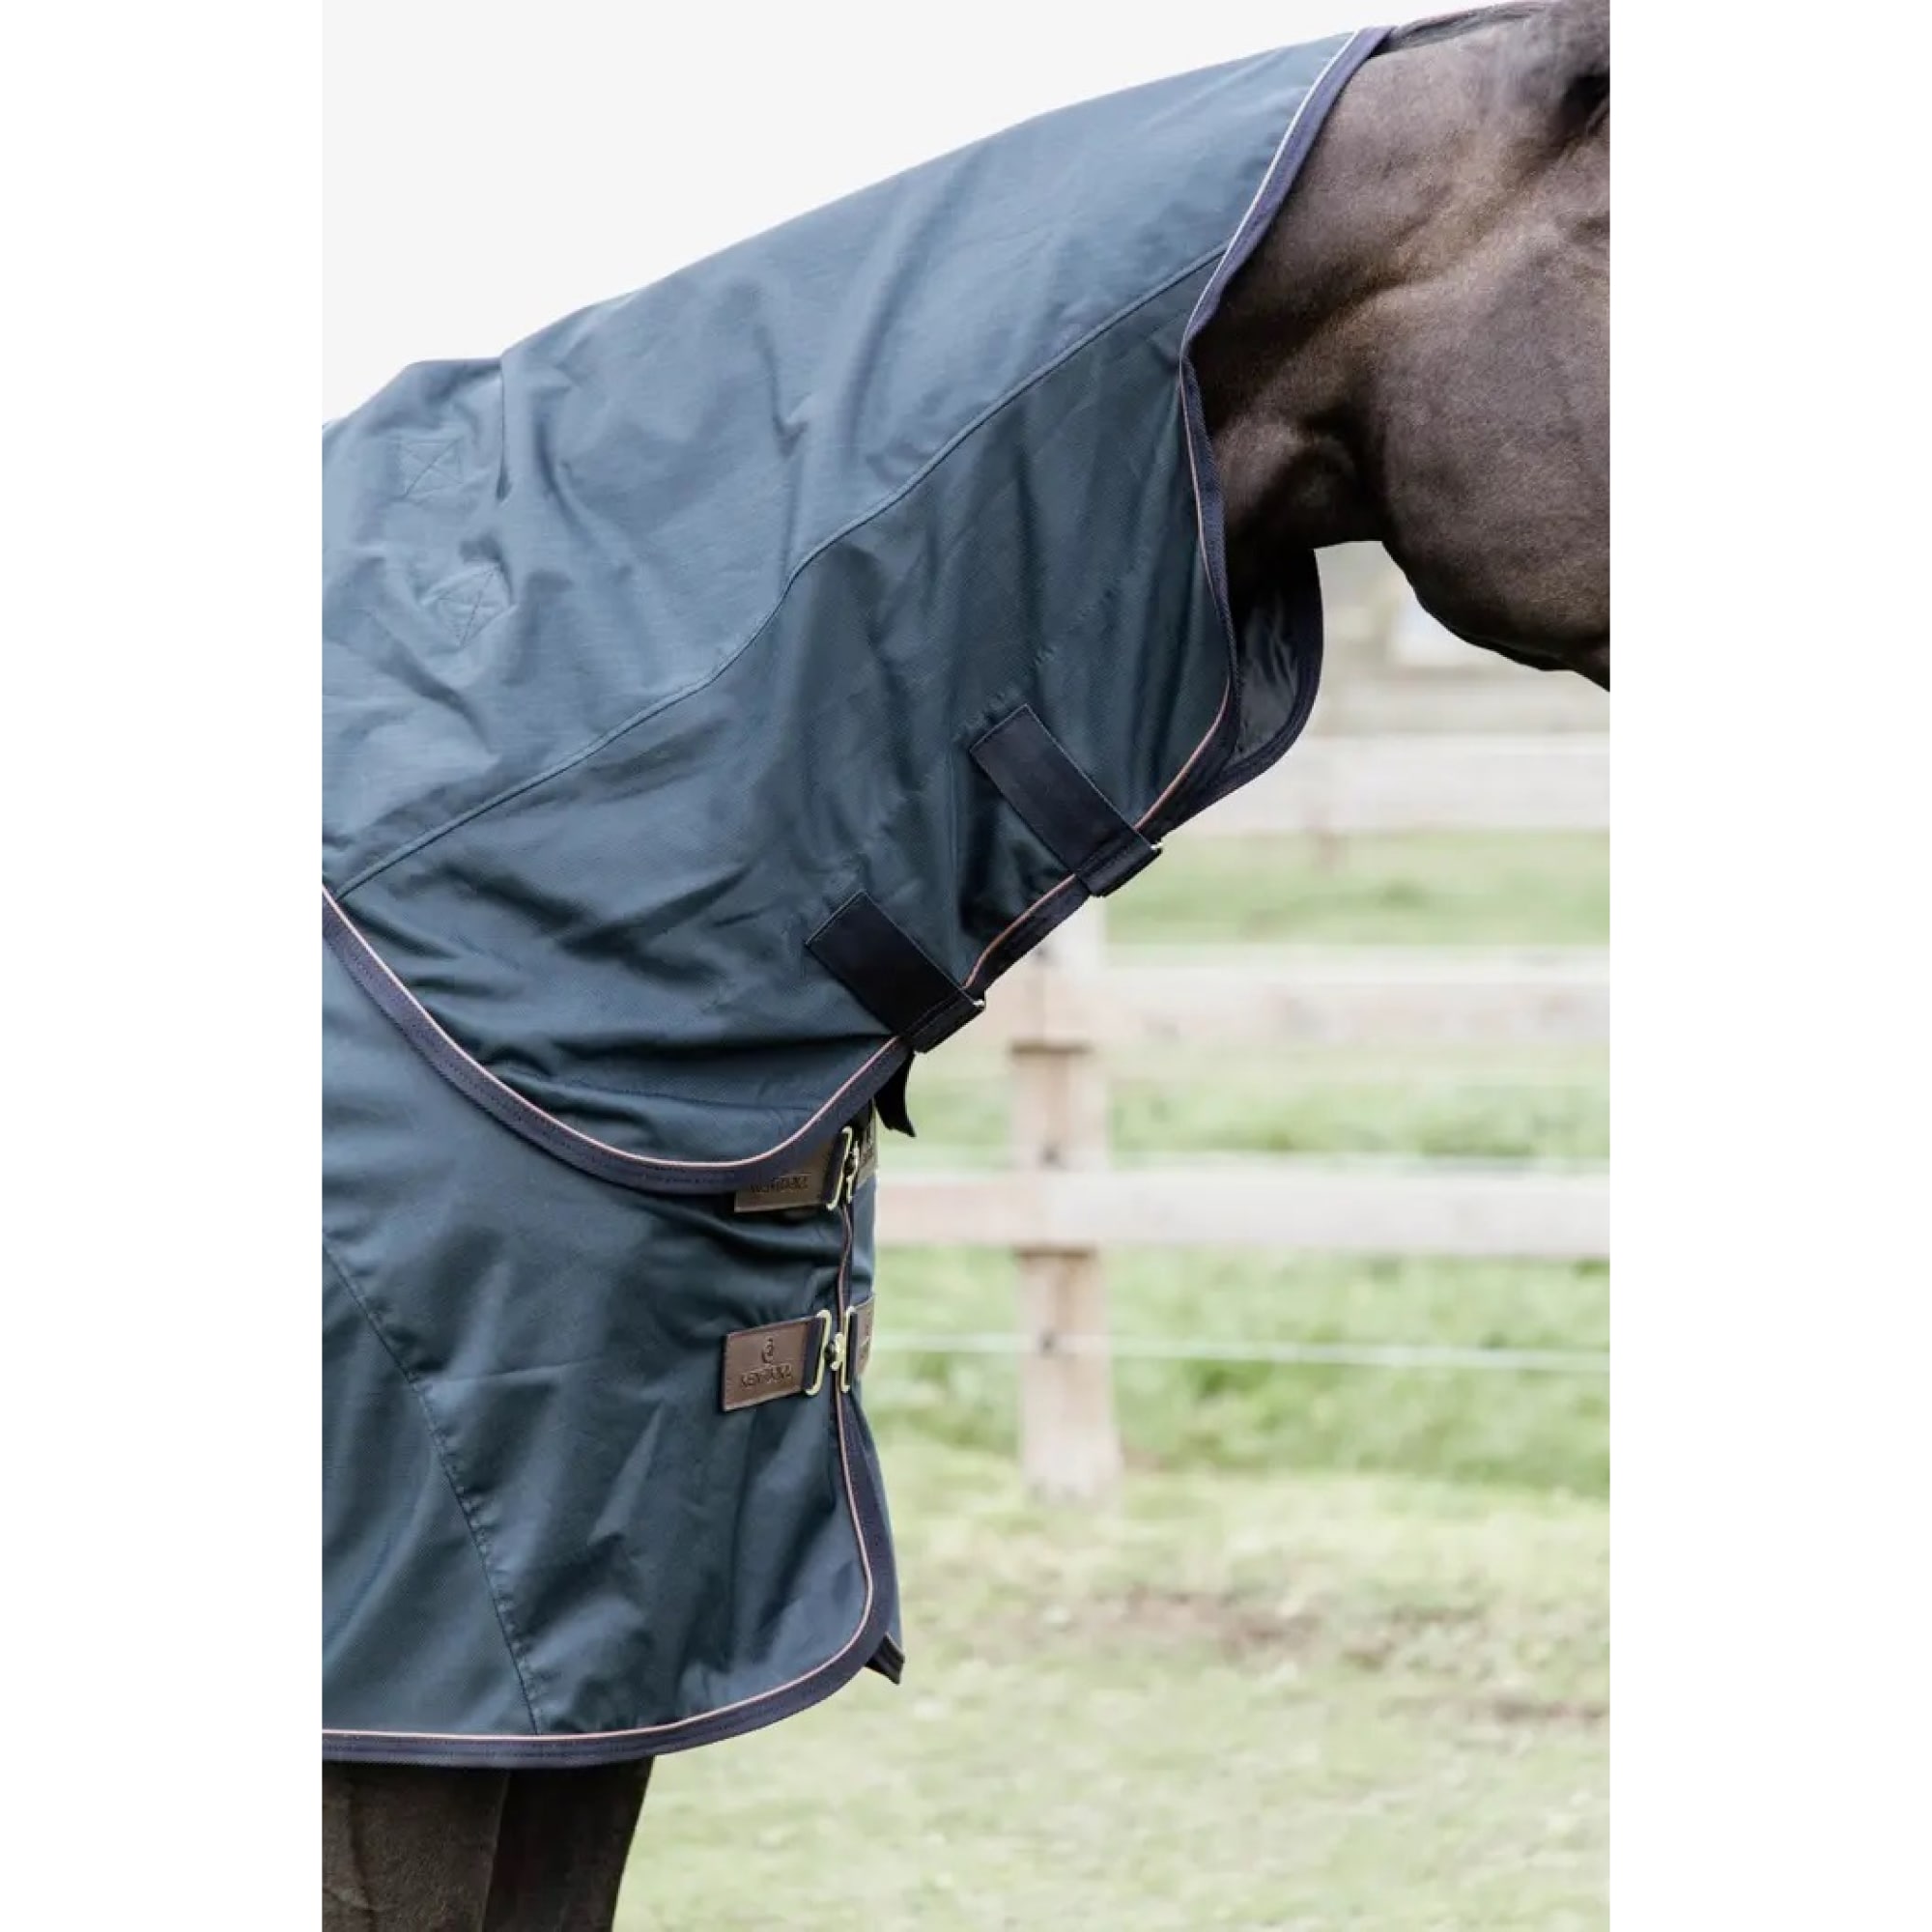 KENTUCKY COUVERTURE ANTI-MOUCHES IMPERMÉABLE COMBO CLASSIC